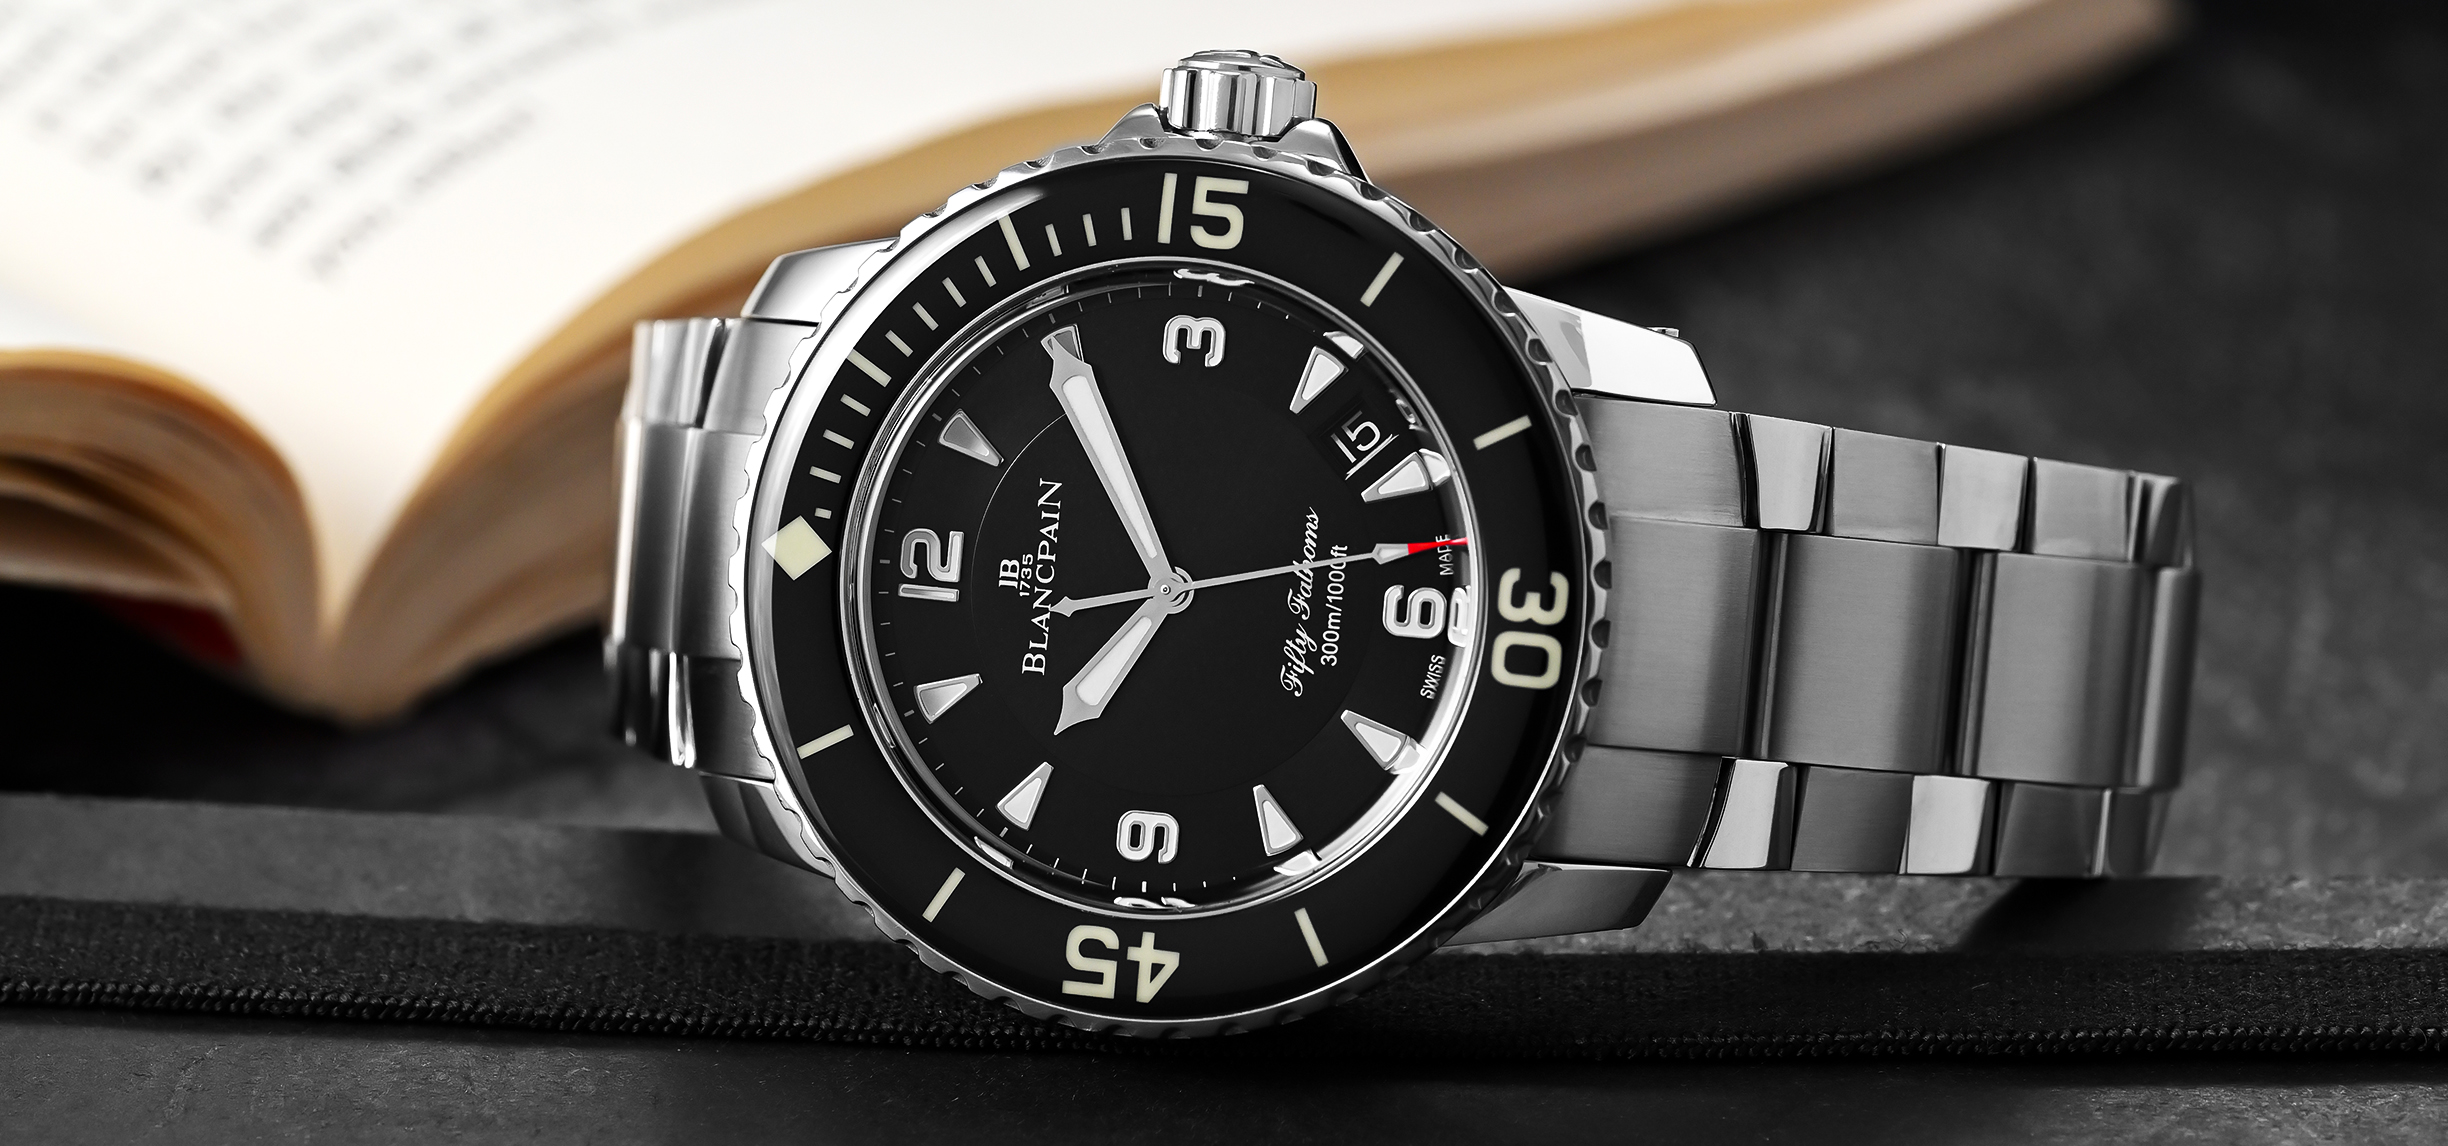 70 Years Of The Archetypal Dive Watch – Blancpain Fifty Fathoms